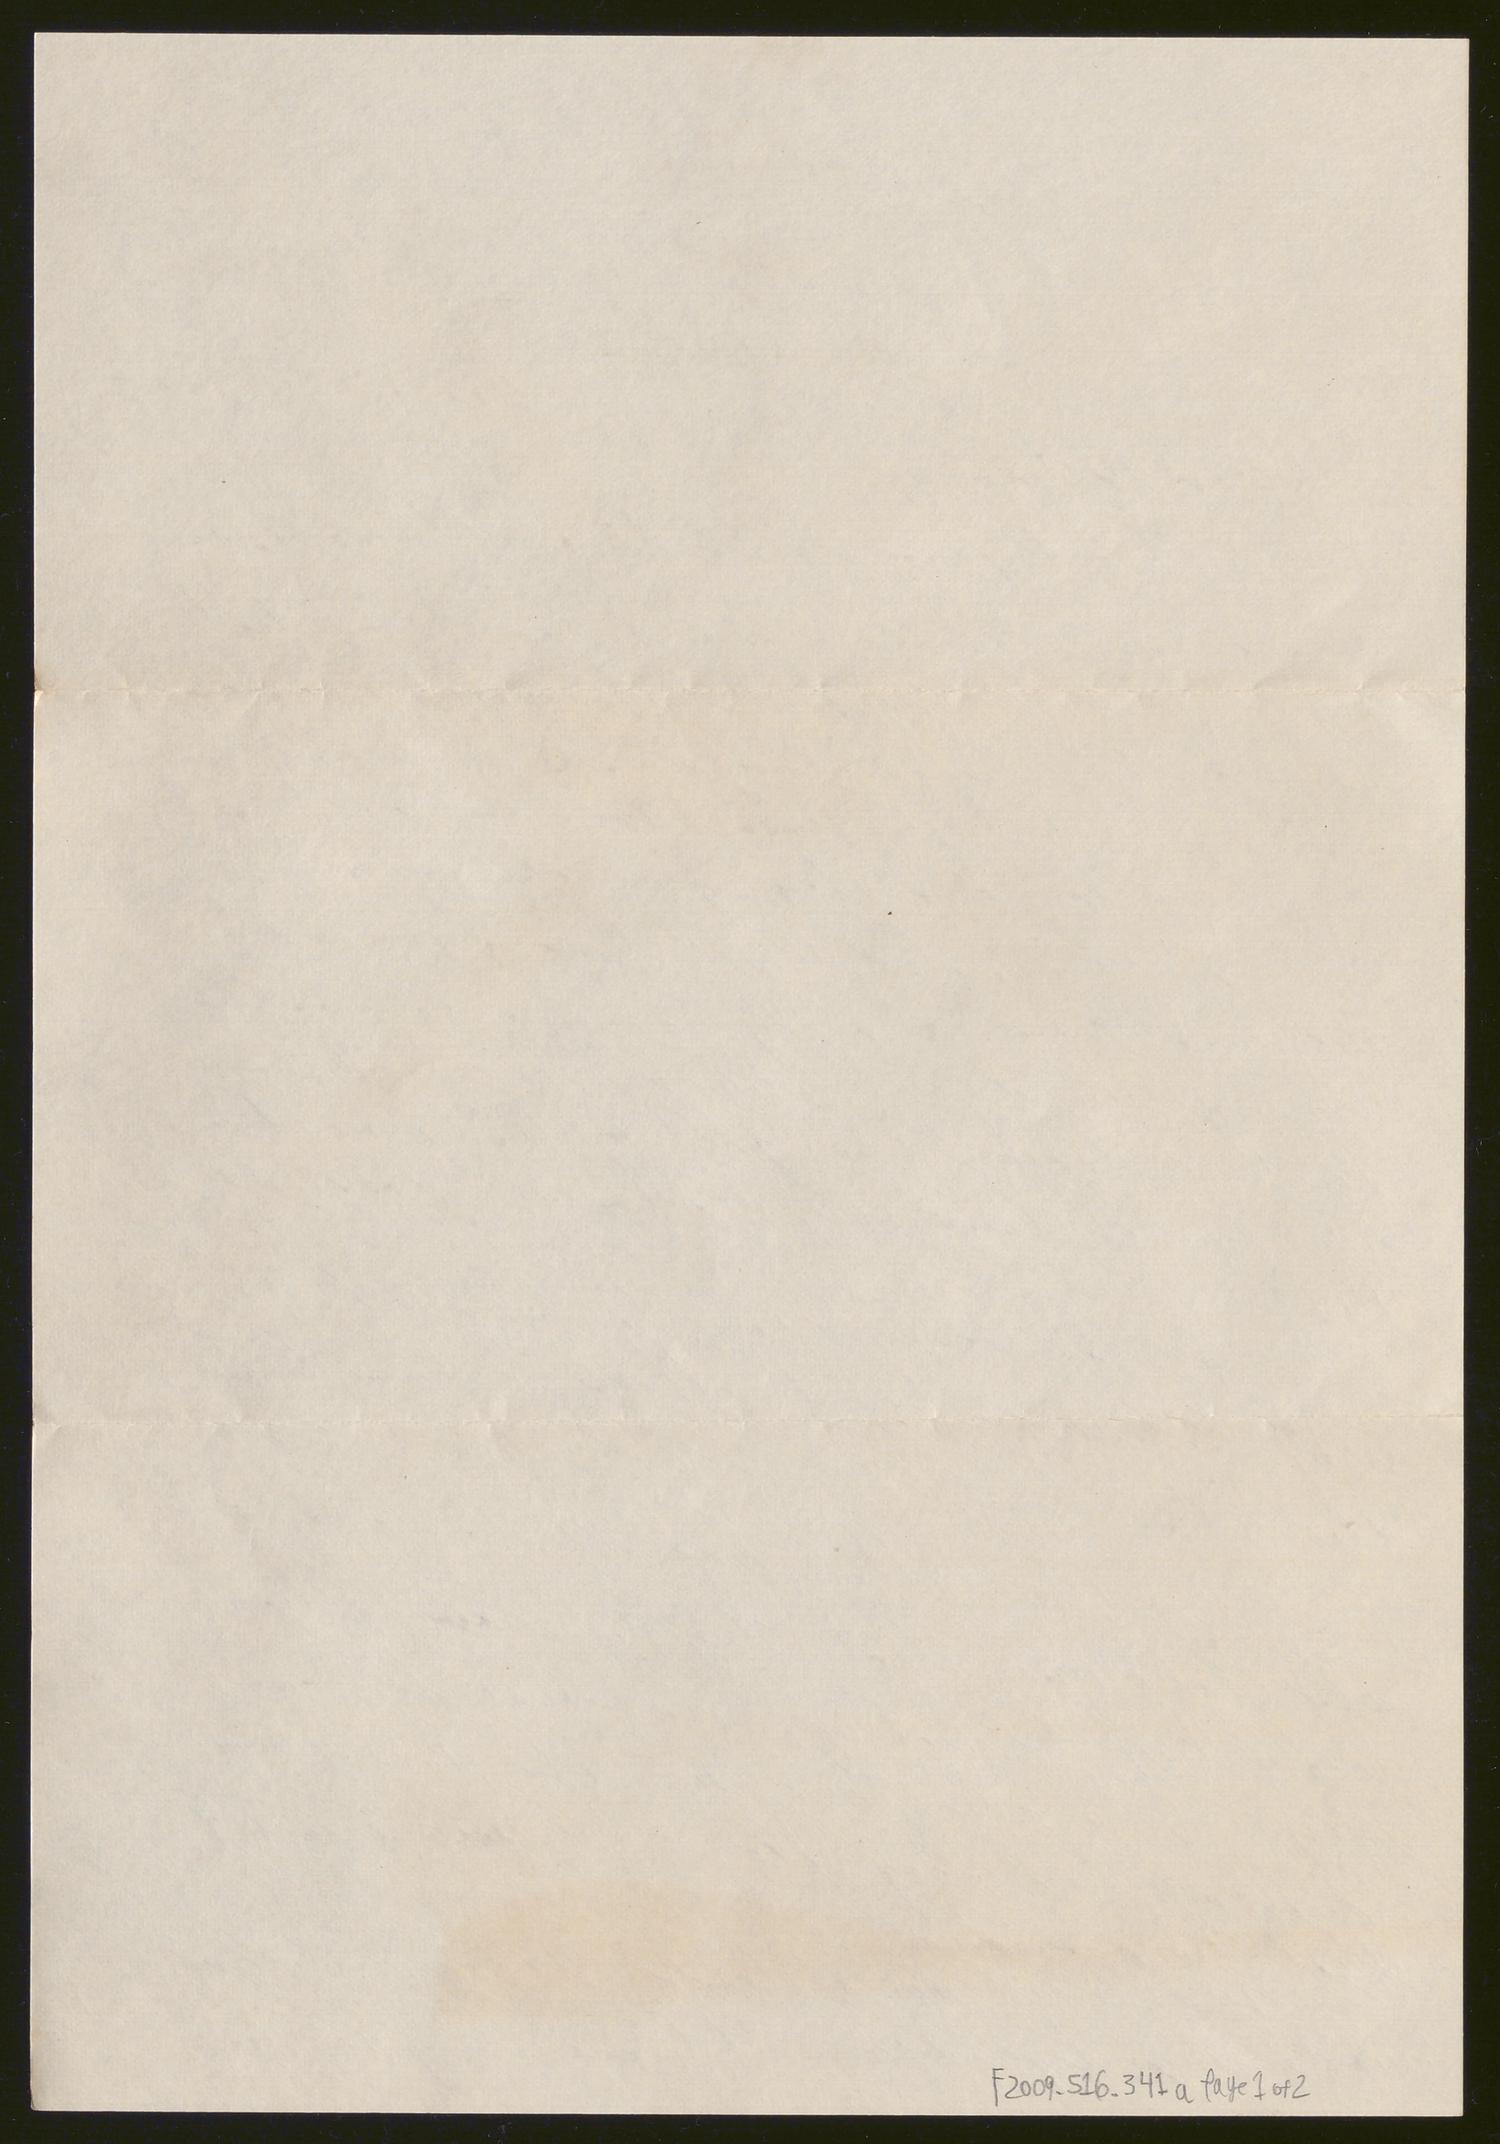 [Letter from Joe Davis to Catherine Davis - October 12, 1943]
                                                
                                                    [Sequence #]: 2 of 6
                                                